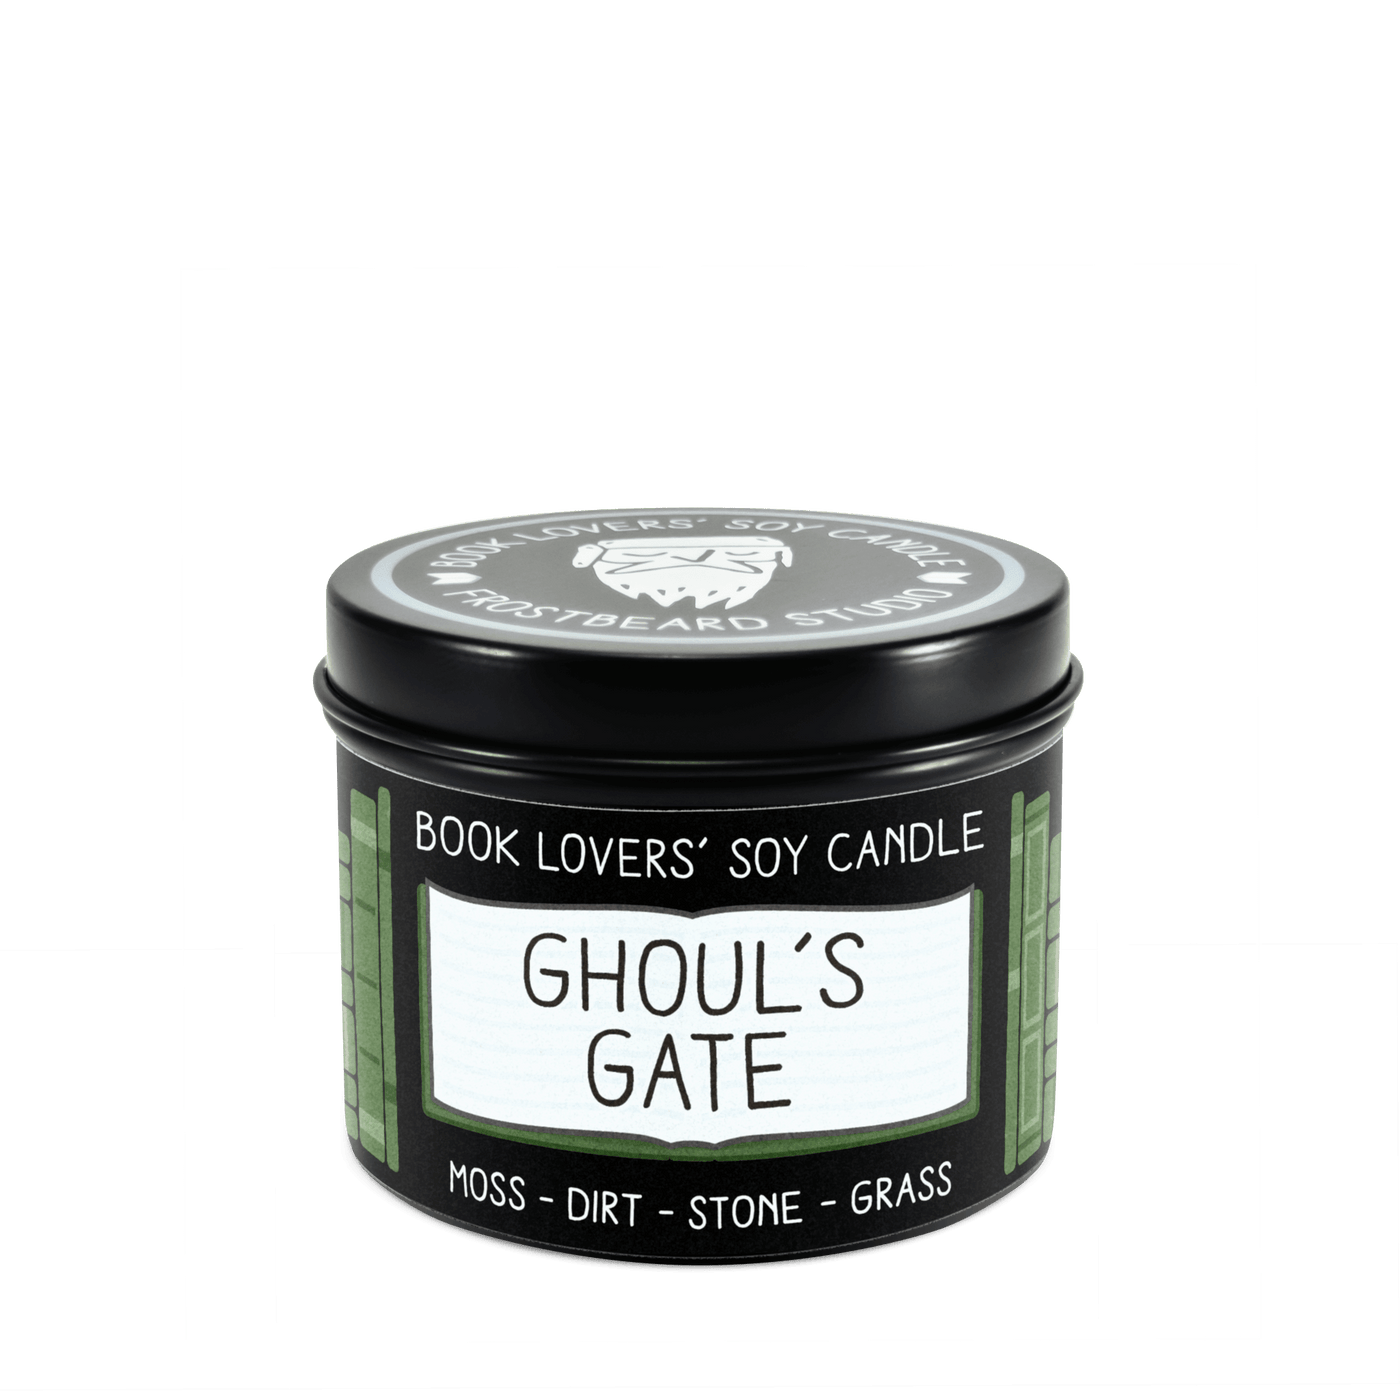 Ghoul's Gate  -  4 oz Tin  -  Book Lovers' Soy Candle  -  Frostbeard Studio